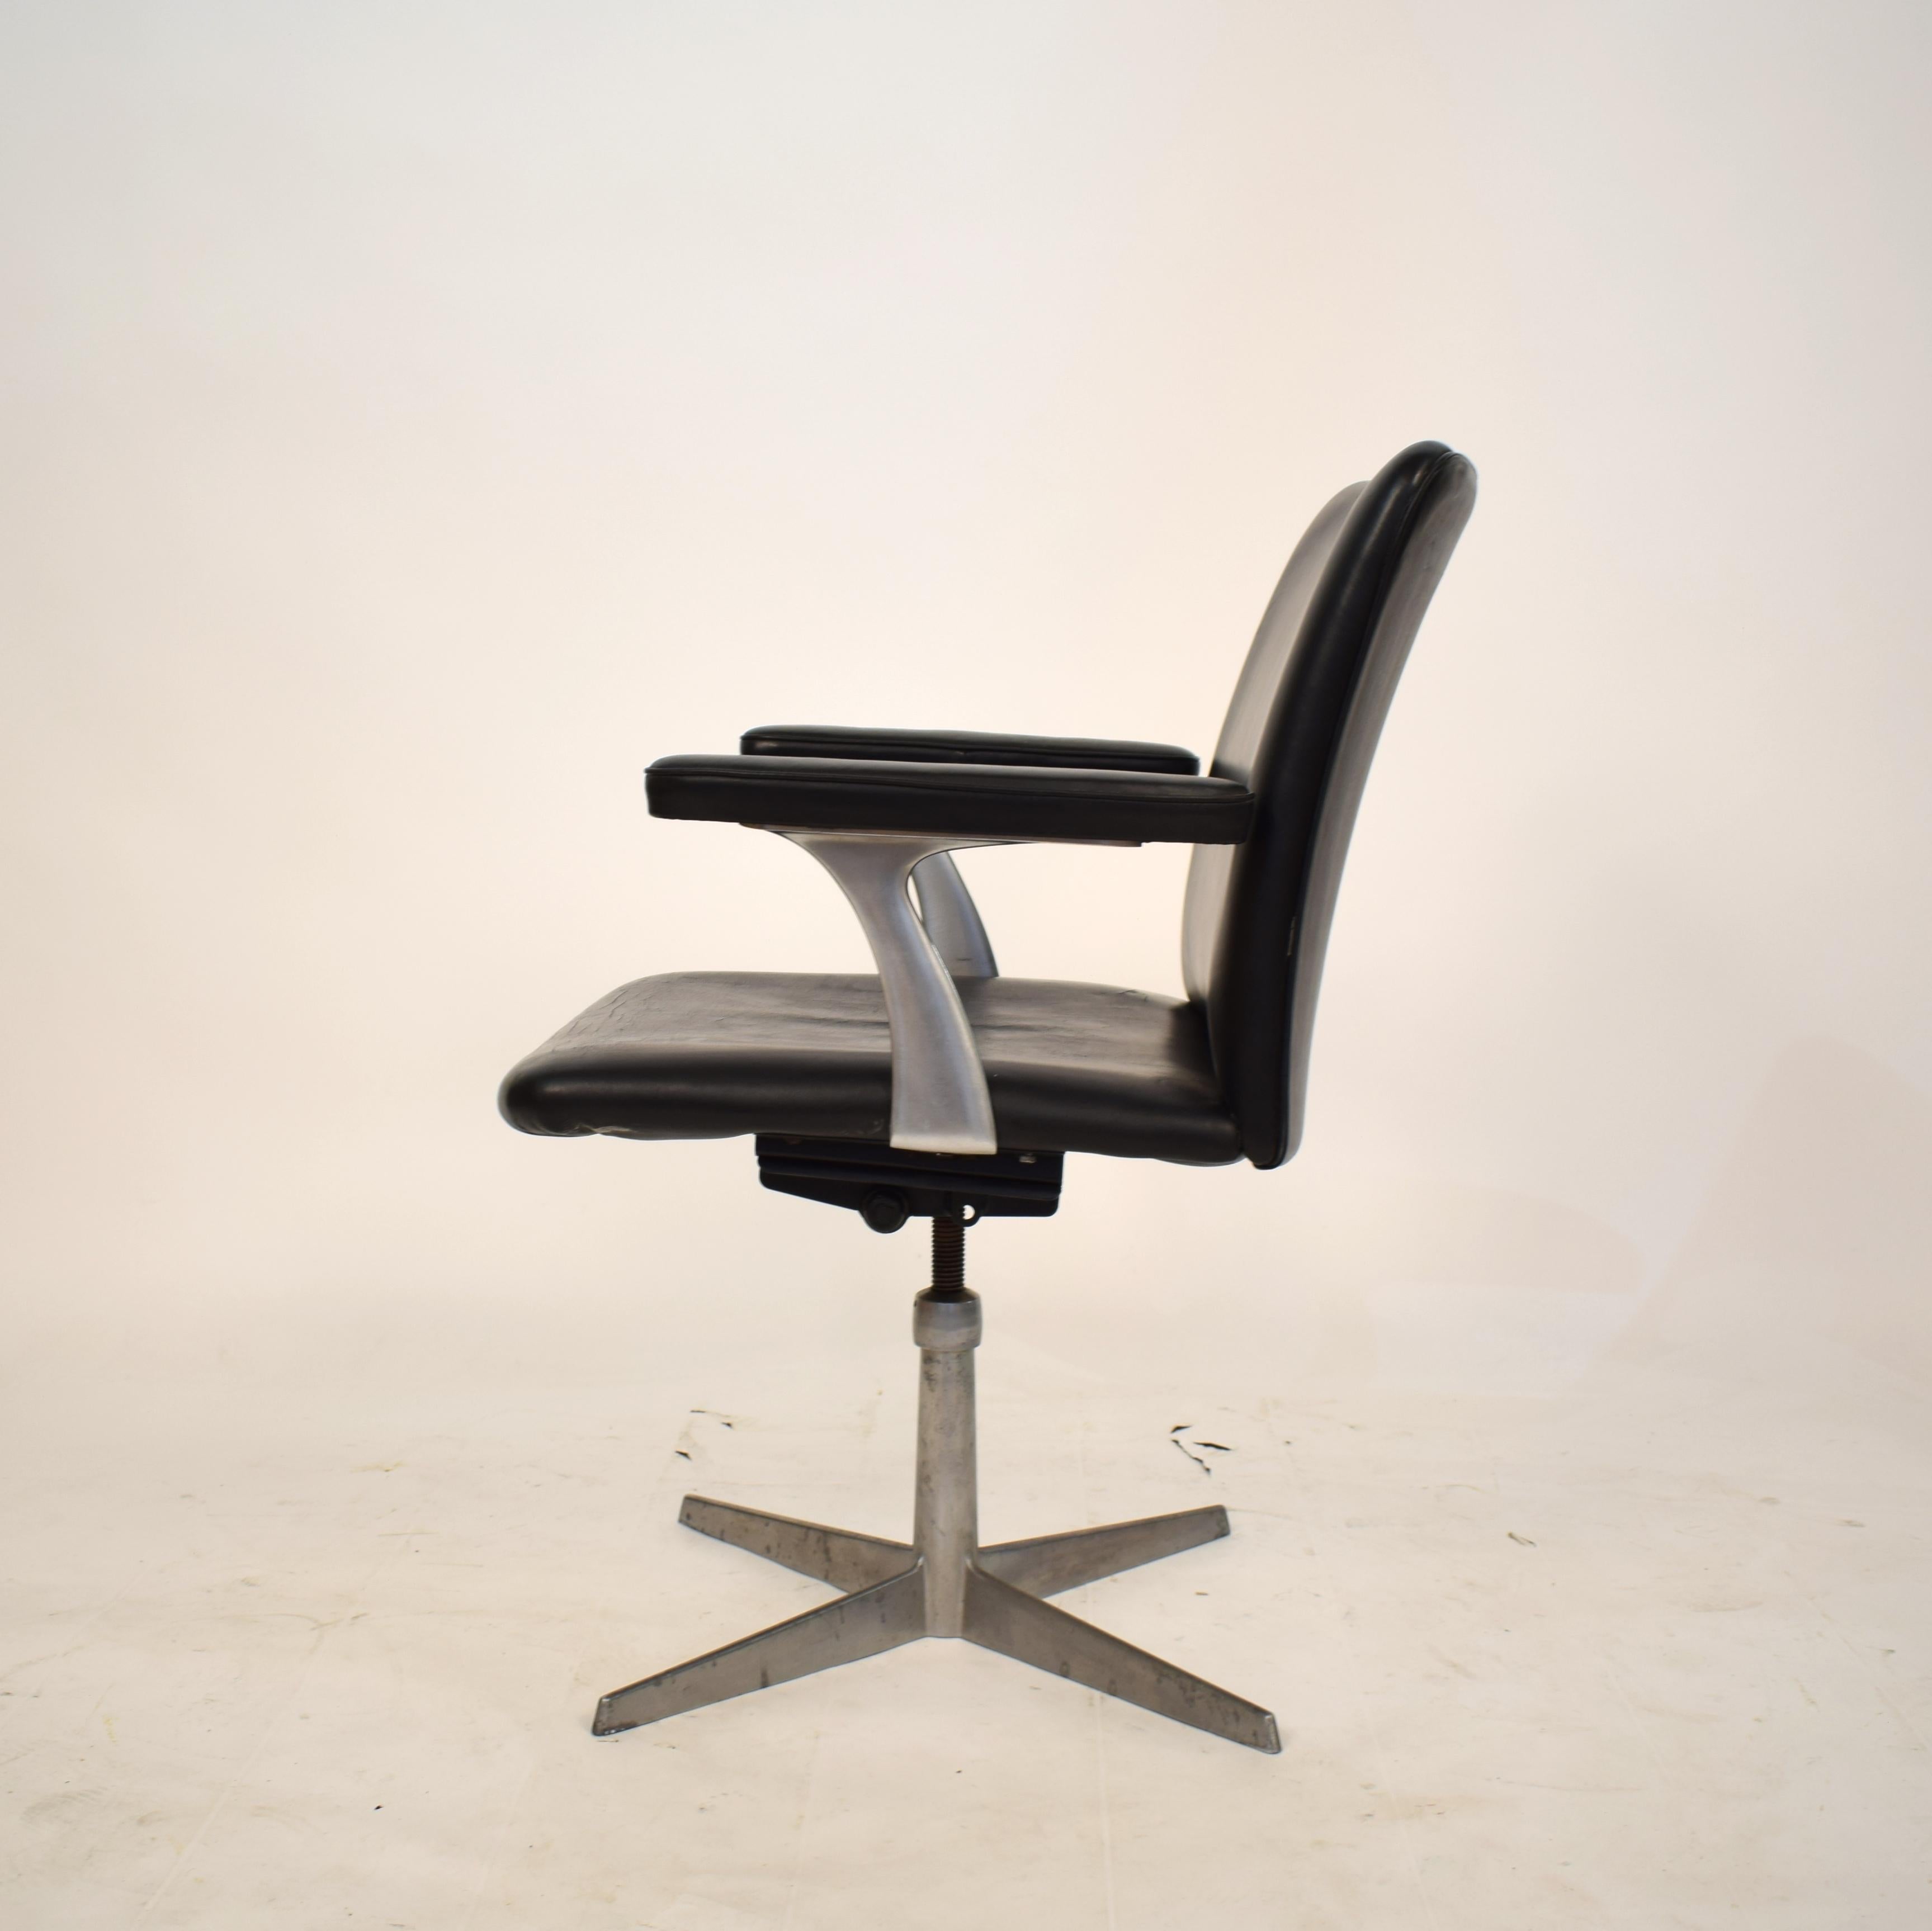 Late 20th Century Midcentury Scandinavian Armchair in Black Leather and Aluminum, circa 1970 For Sale